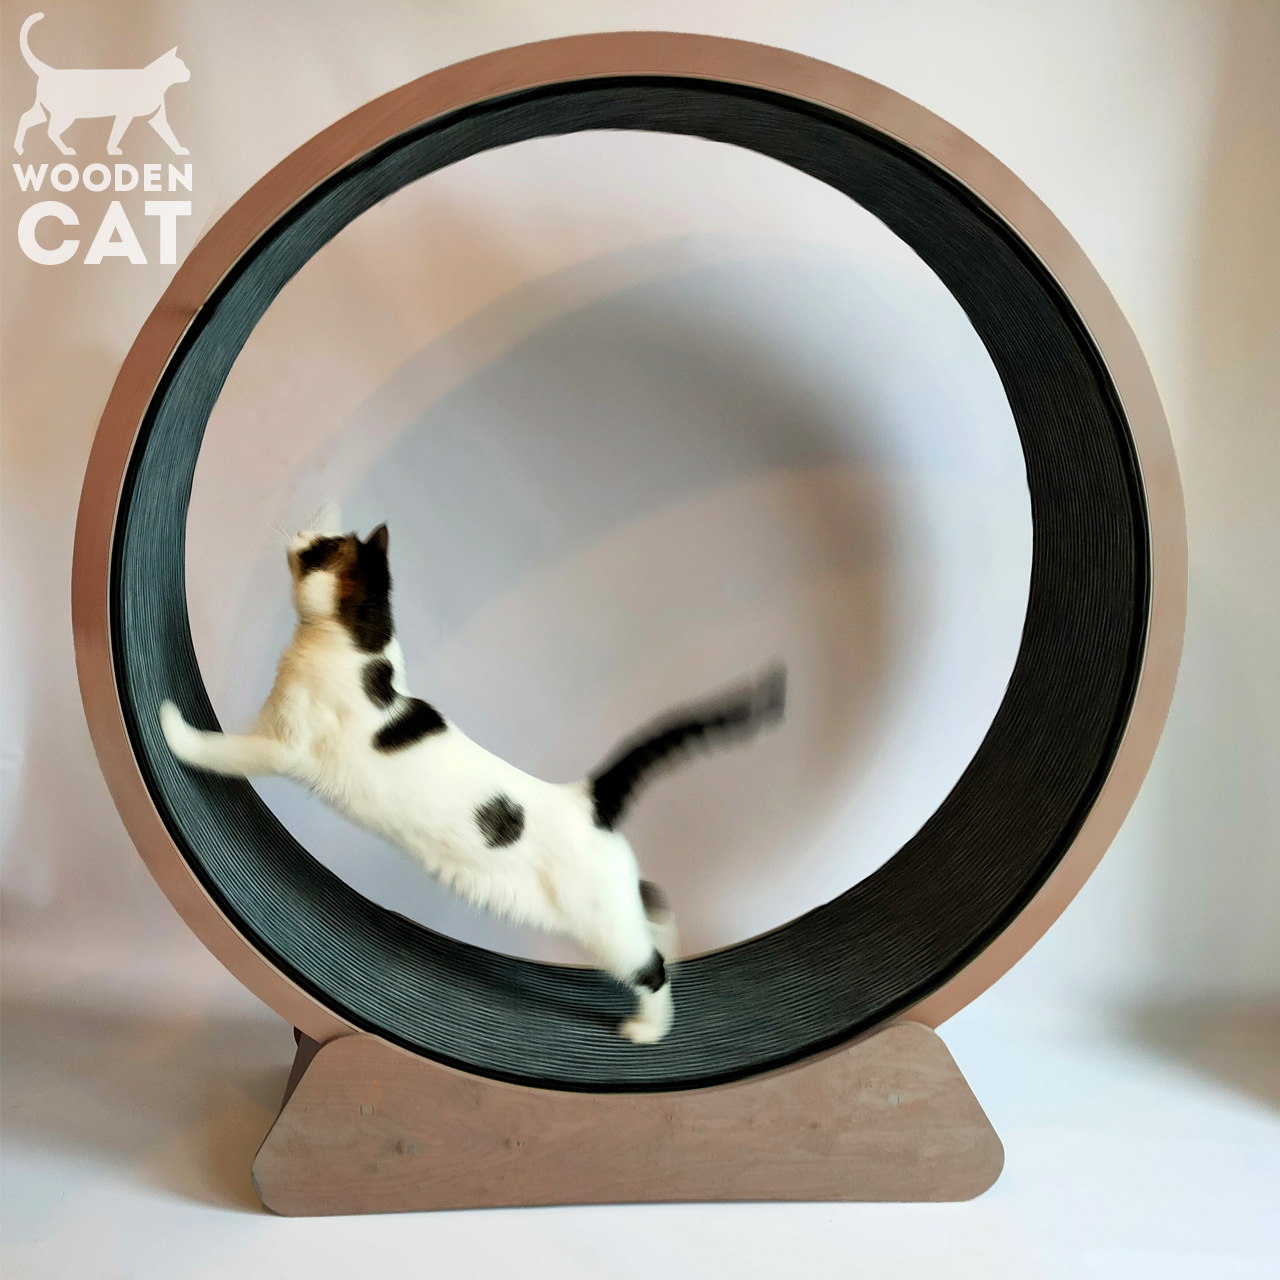 How to teach your cat to use wheel?